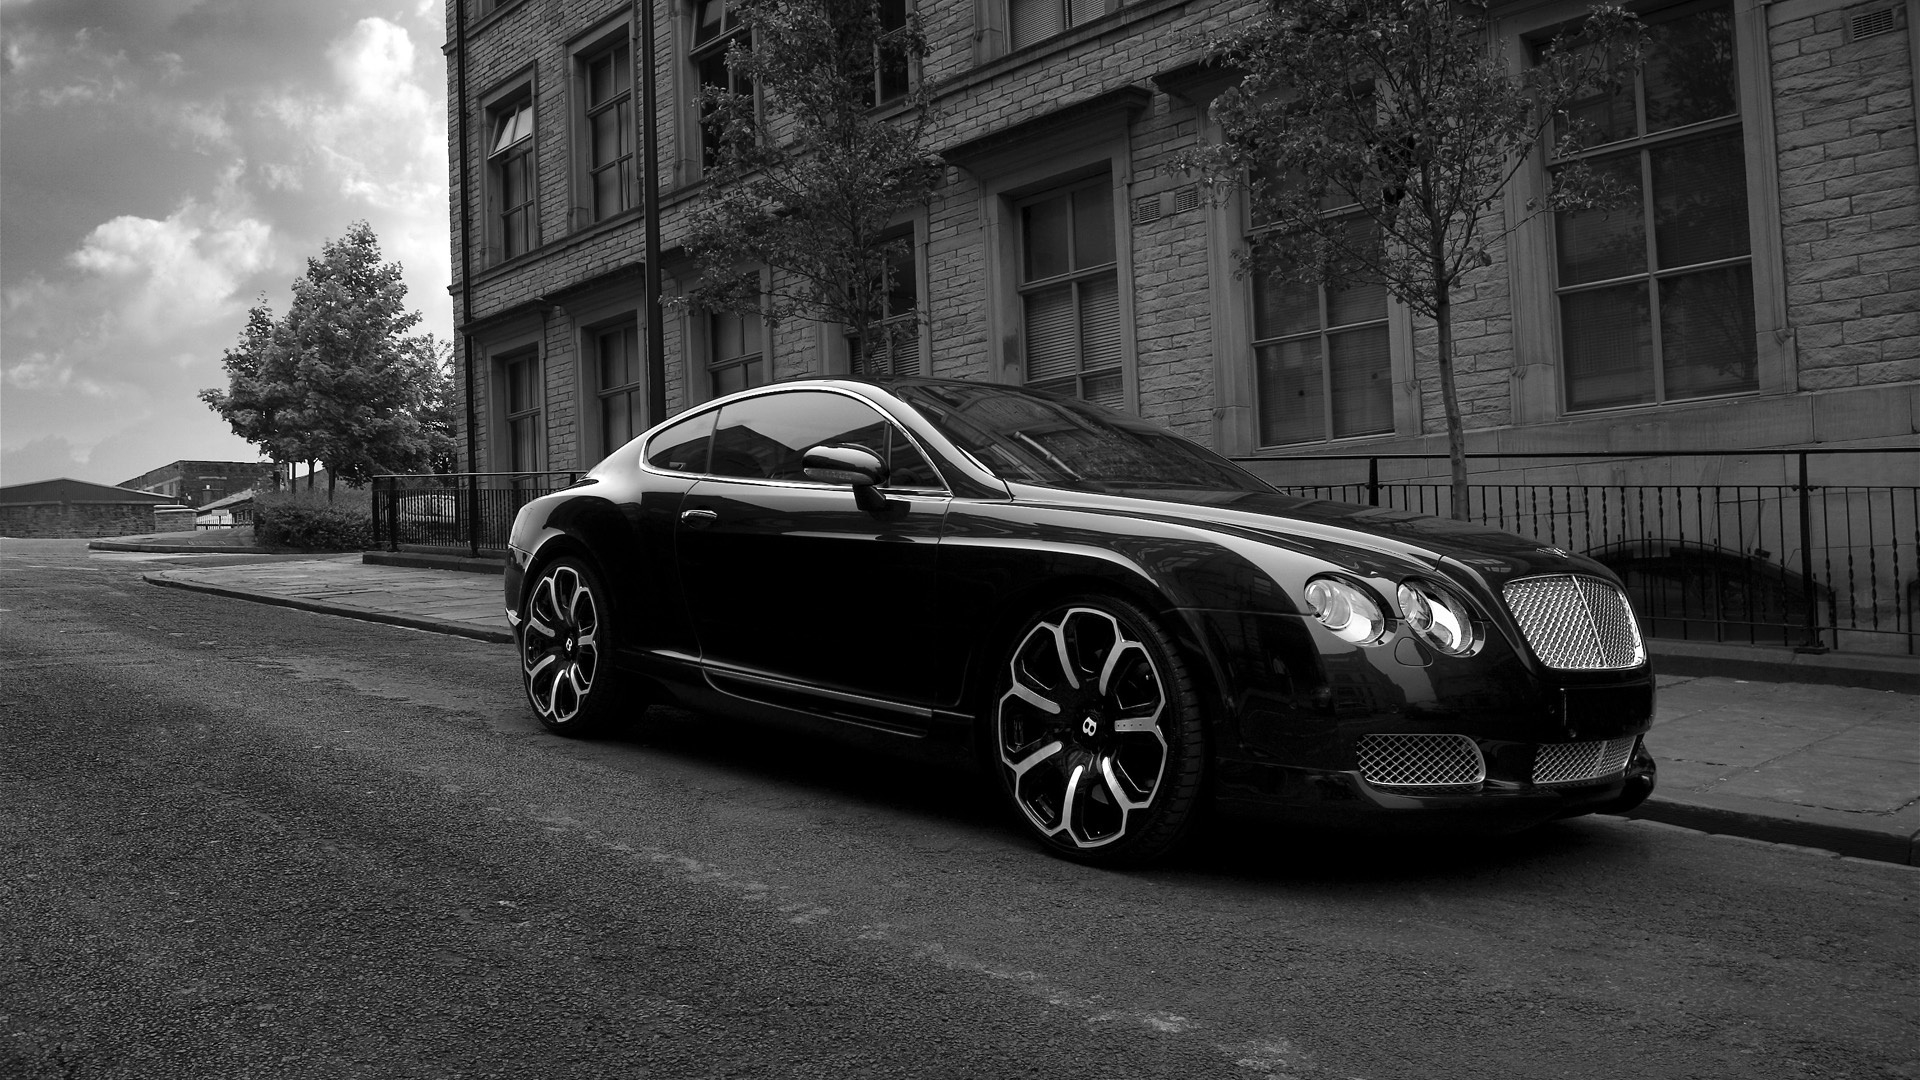 Bentley GTS Black Edition Project Kahn 2008 Side for 1920 x 1080 HDTV 1080p resolution